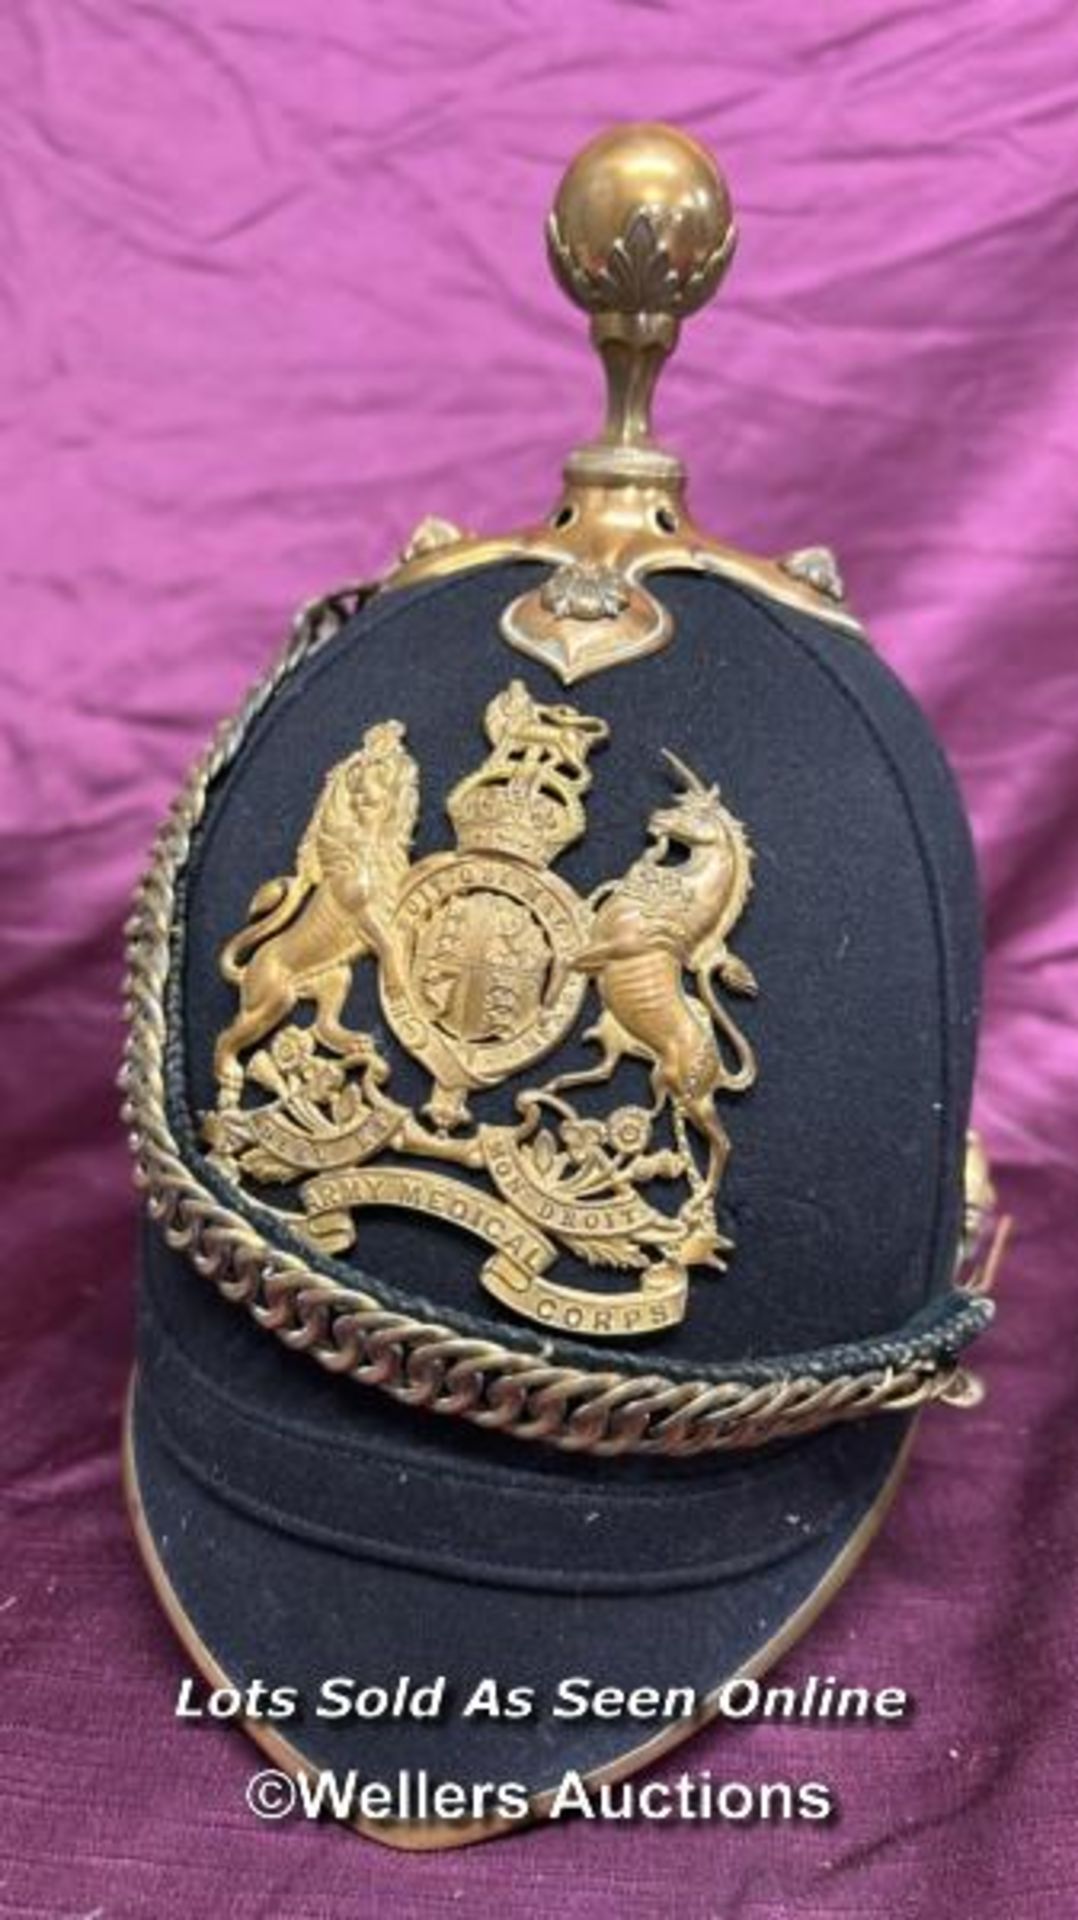 GEORGE V ROYAL ARMY MEDICAL CORPS OFFICER HELMET, IN ORIGINAL CONDITION WITH SOME WEAR, MADE BY